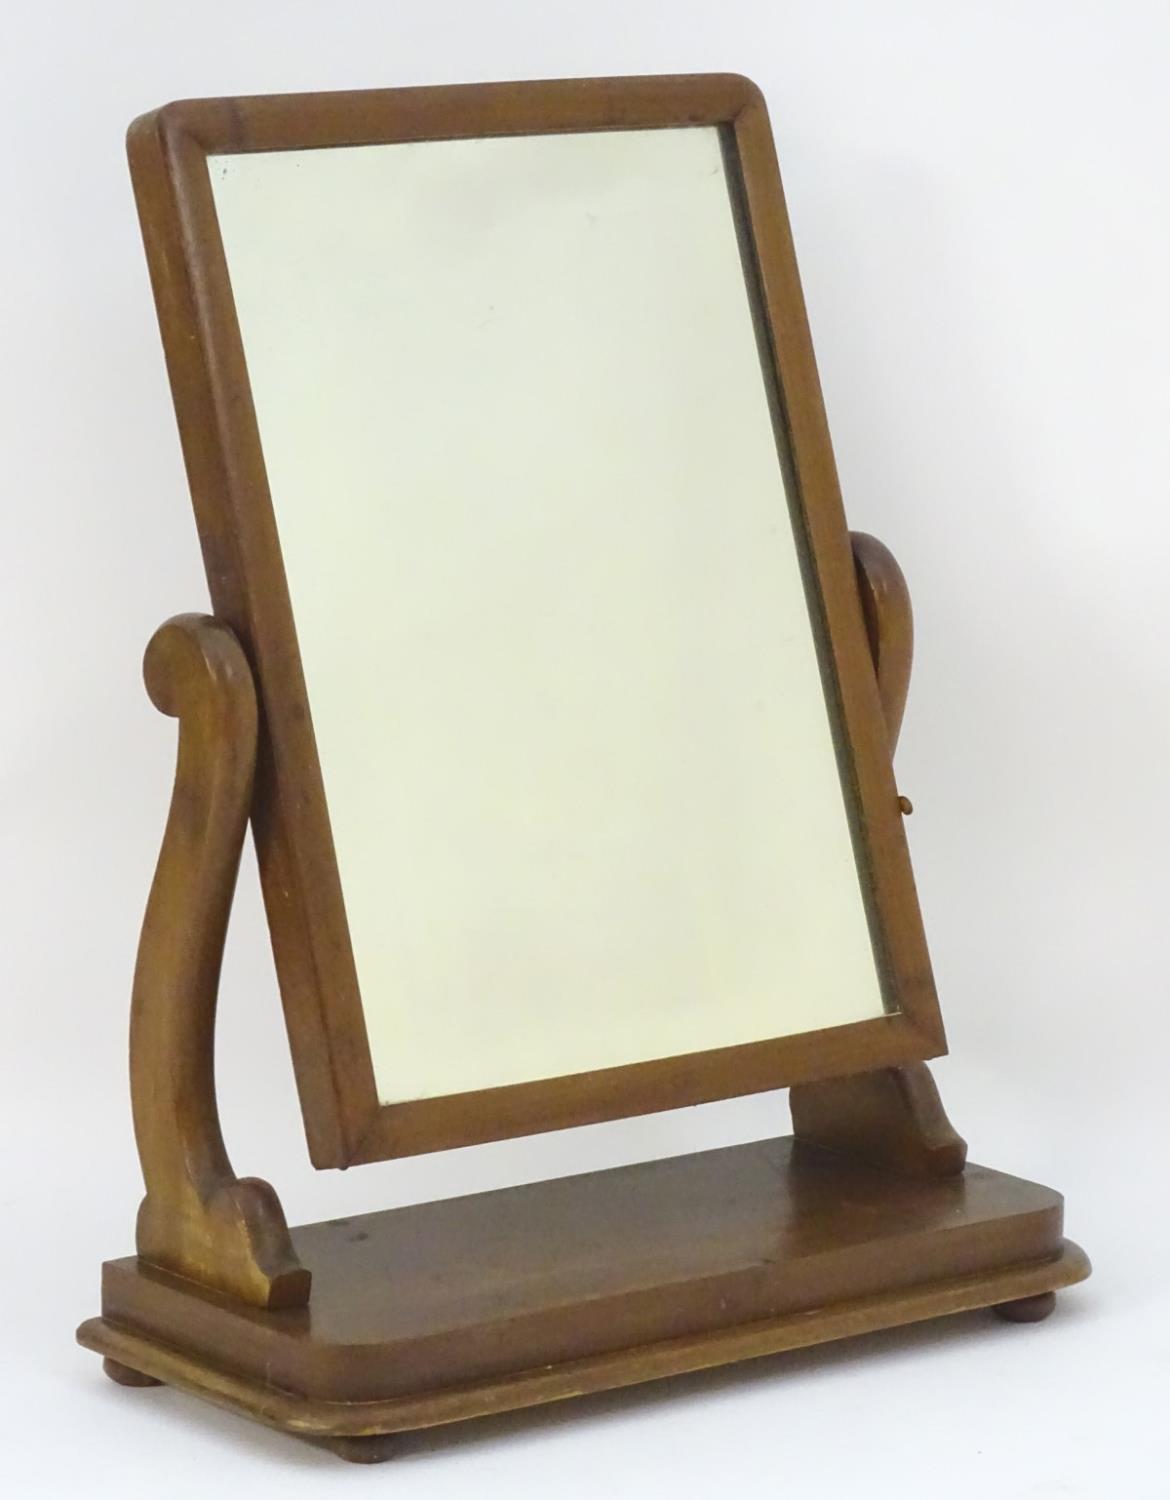 An early / mid 19thC mahogany toilet / dressing mirror with scrolled supports and a rectangular